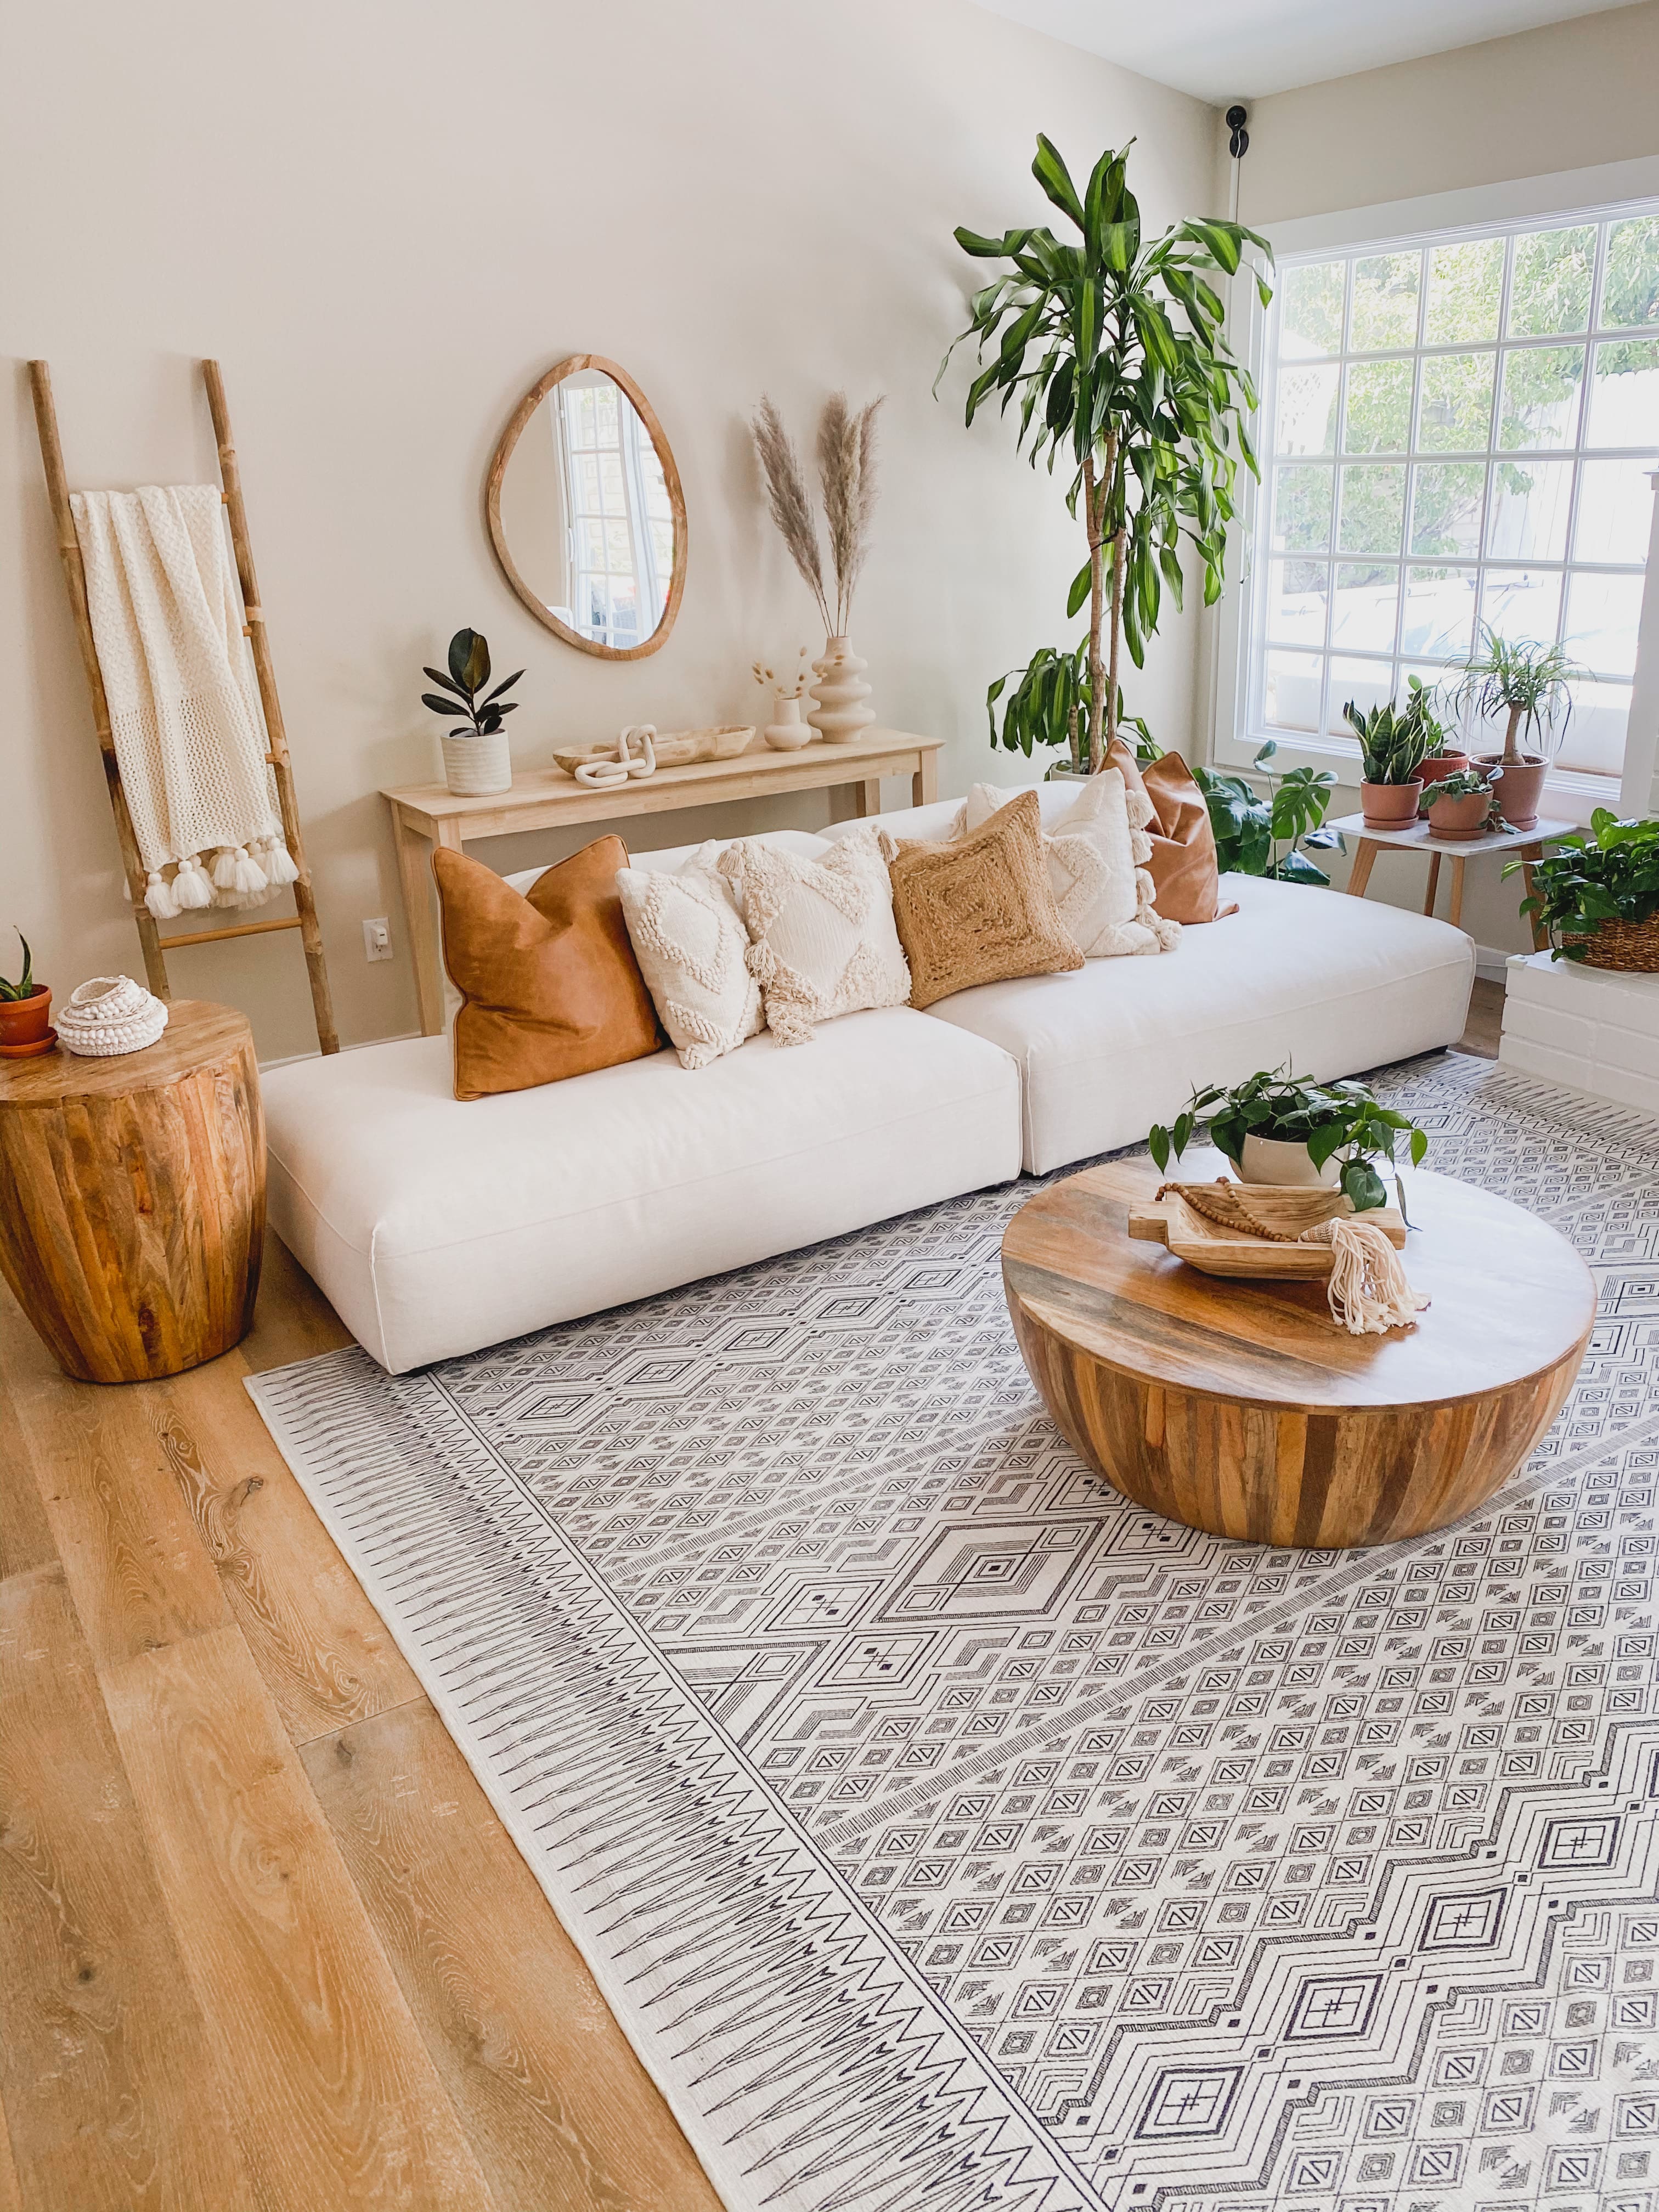 How to Choose the Perfect Area Rug for Your Room